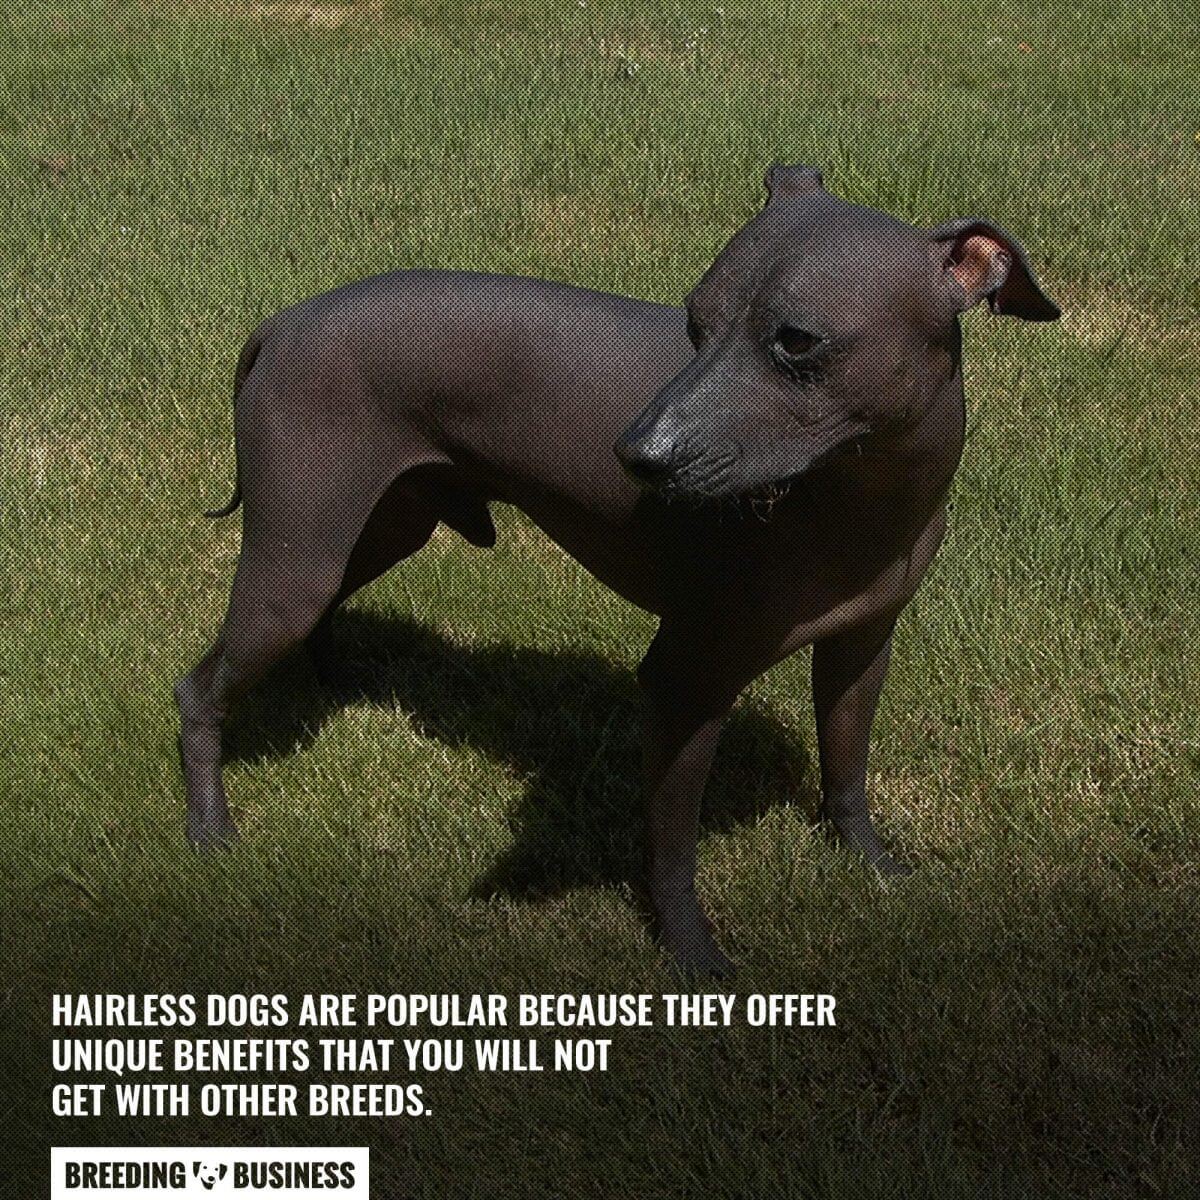 hairless dogs are unique